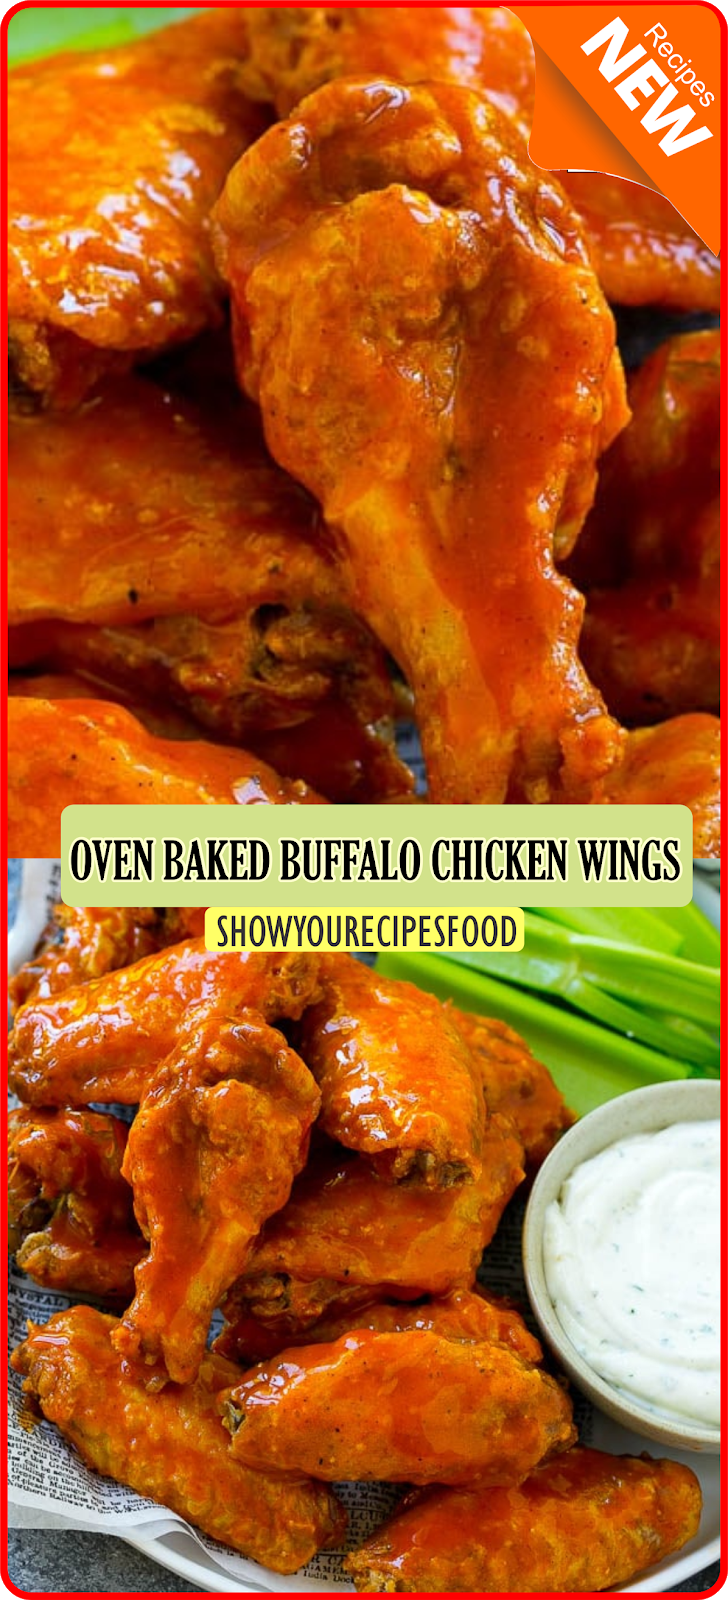 OVEN BAKED BUFFALO CHICKEN WINGS | Show You Recipes